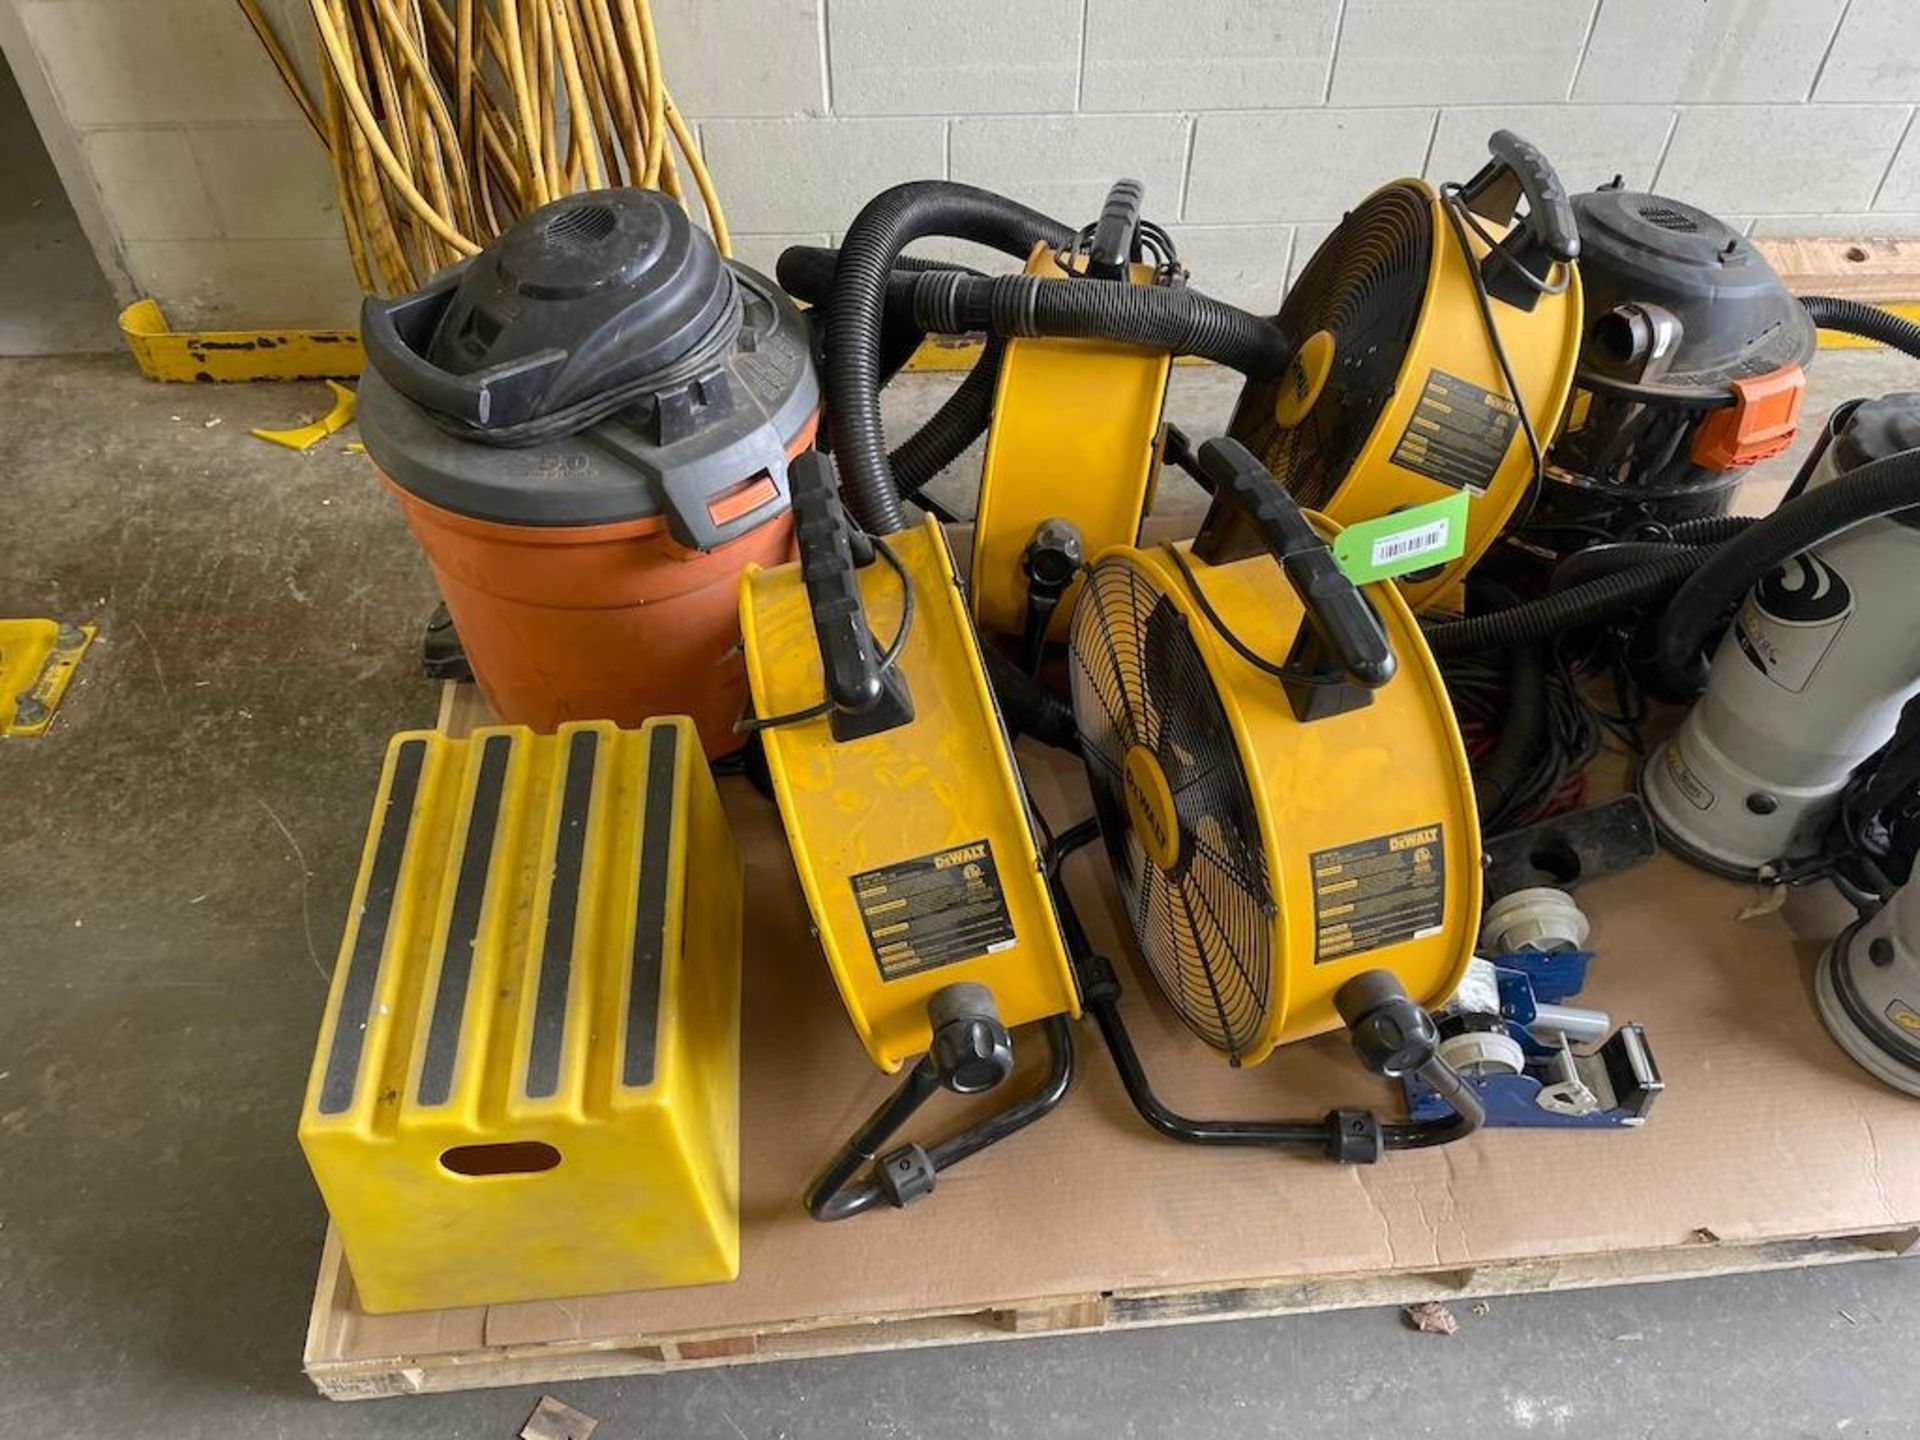 LOT: SKID W FANS, PROVAC, VACUUM CLEANERS [TROIS RIVIERES] *PLEASE NOTE, EXCLUSIVE RIGGING FEE OF $5 - Image 2 of 3